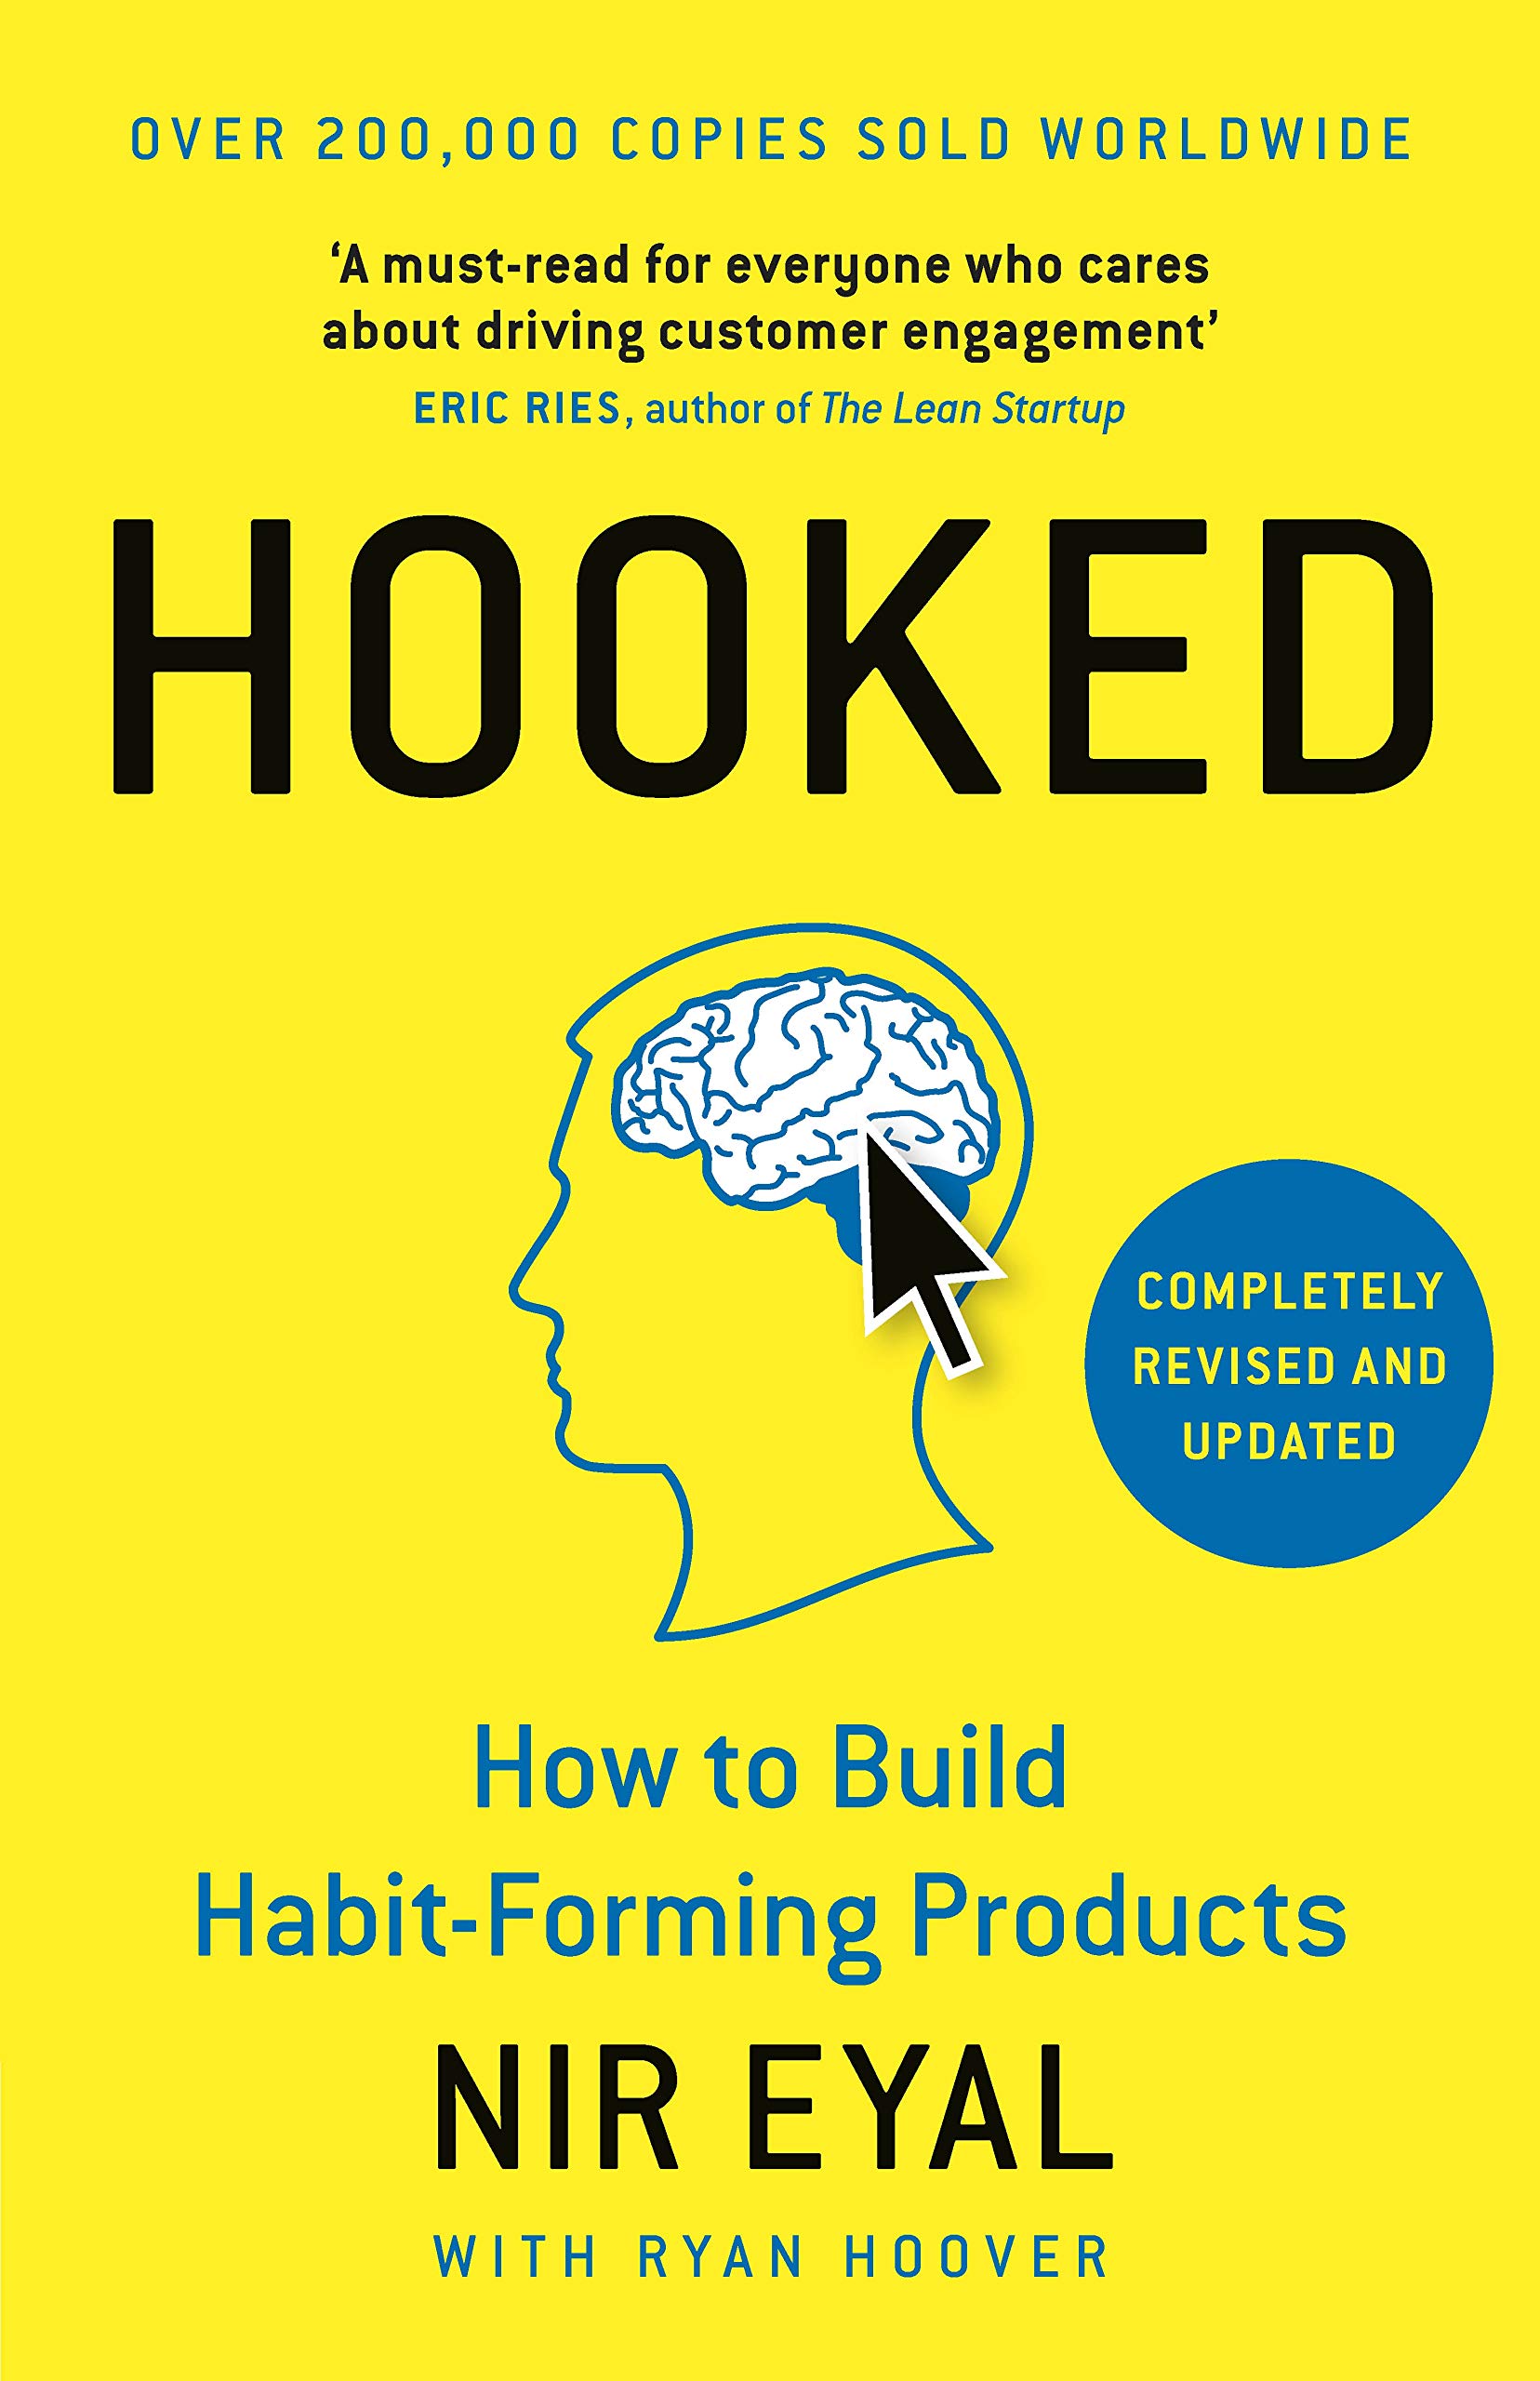 Hooked- How to Build Habit-Forming Products by Nir Eyal